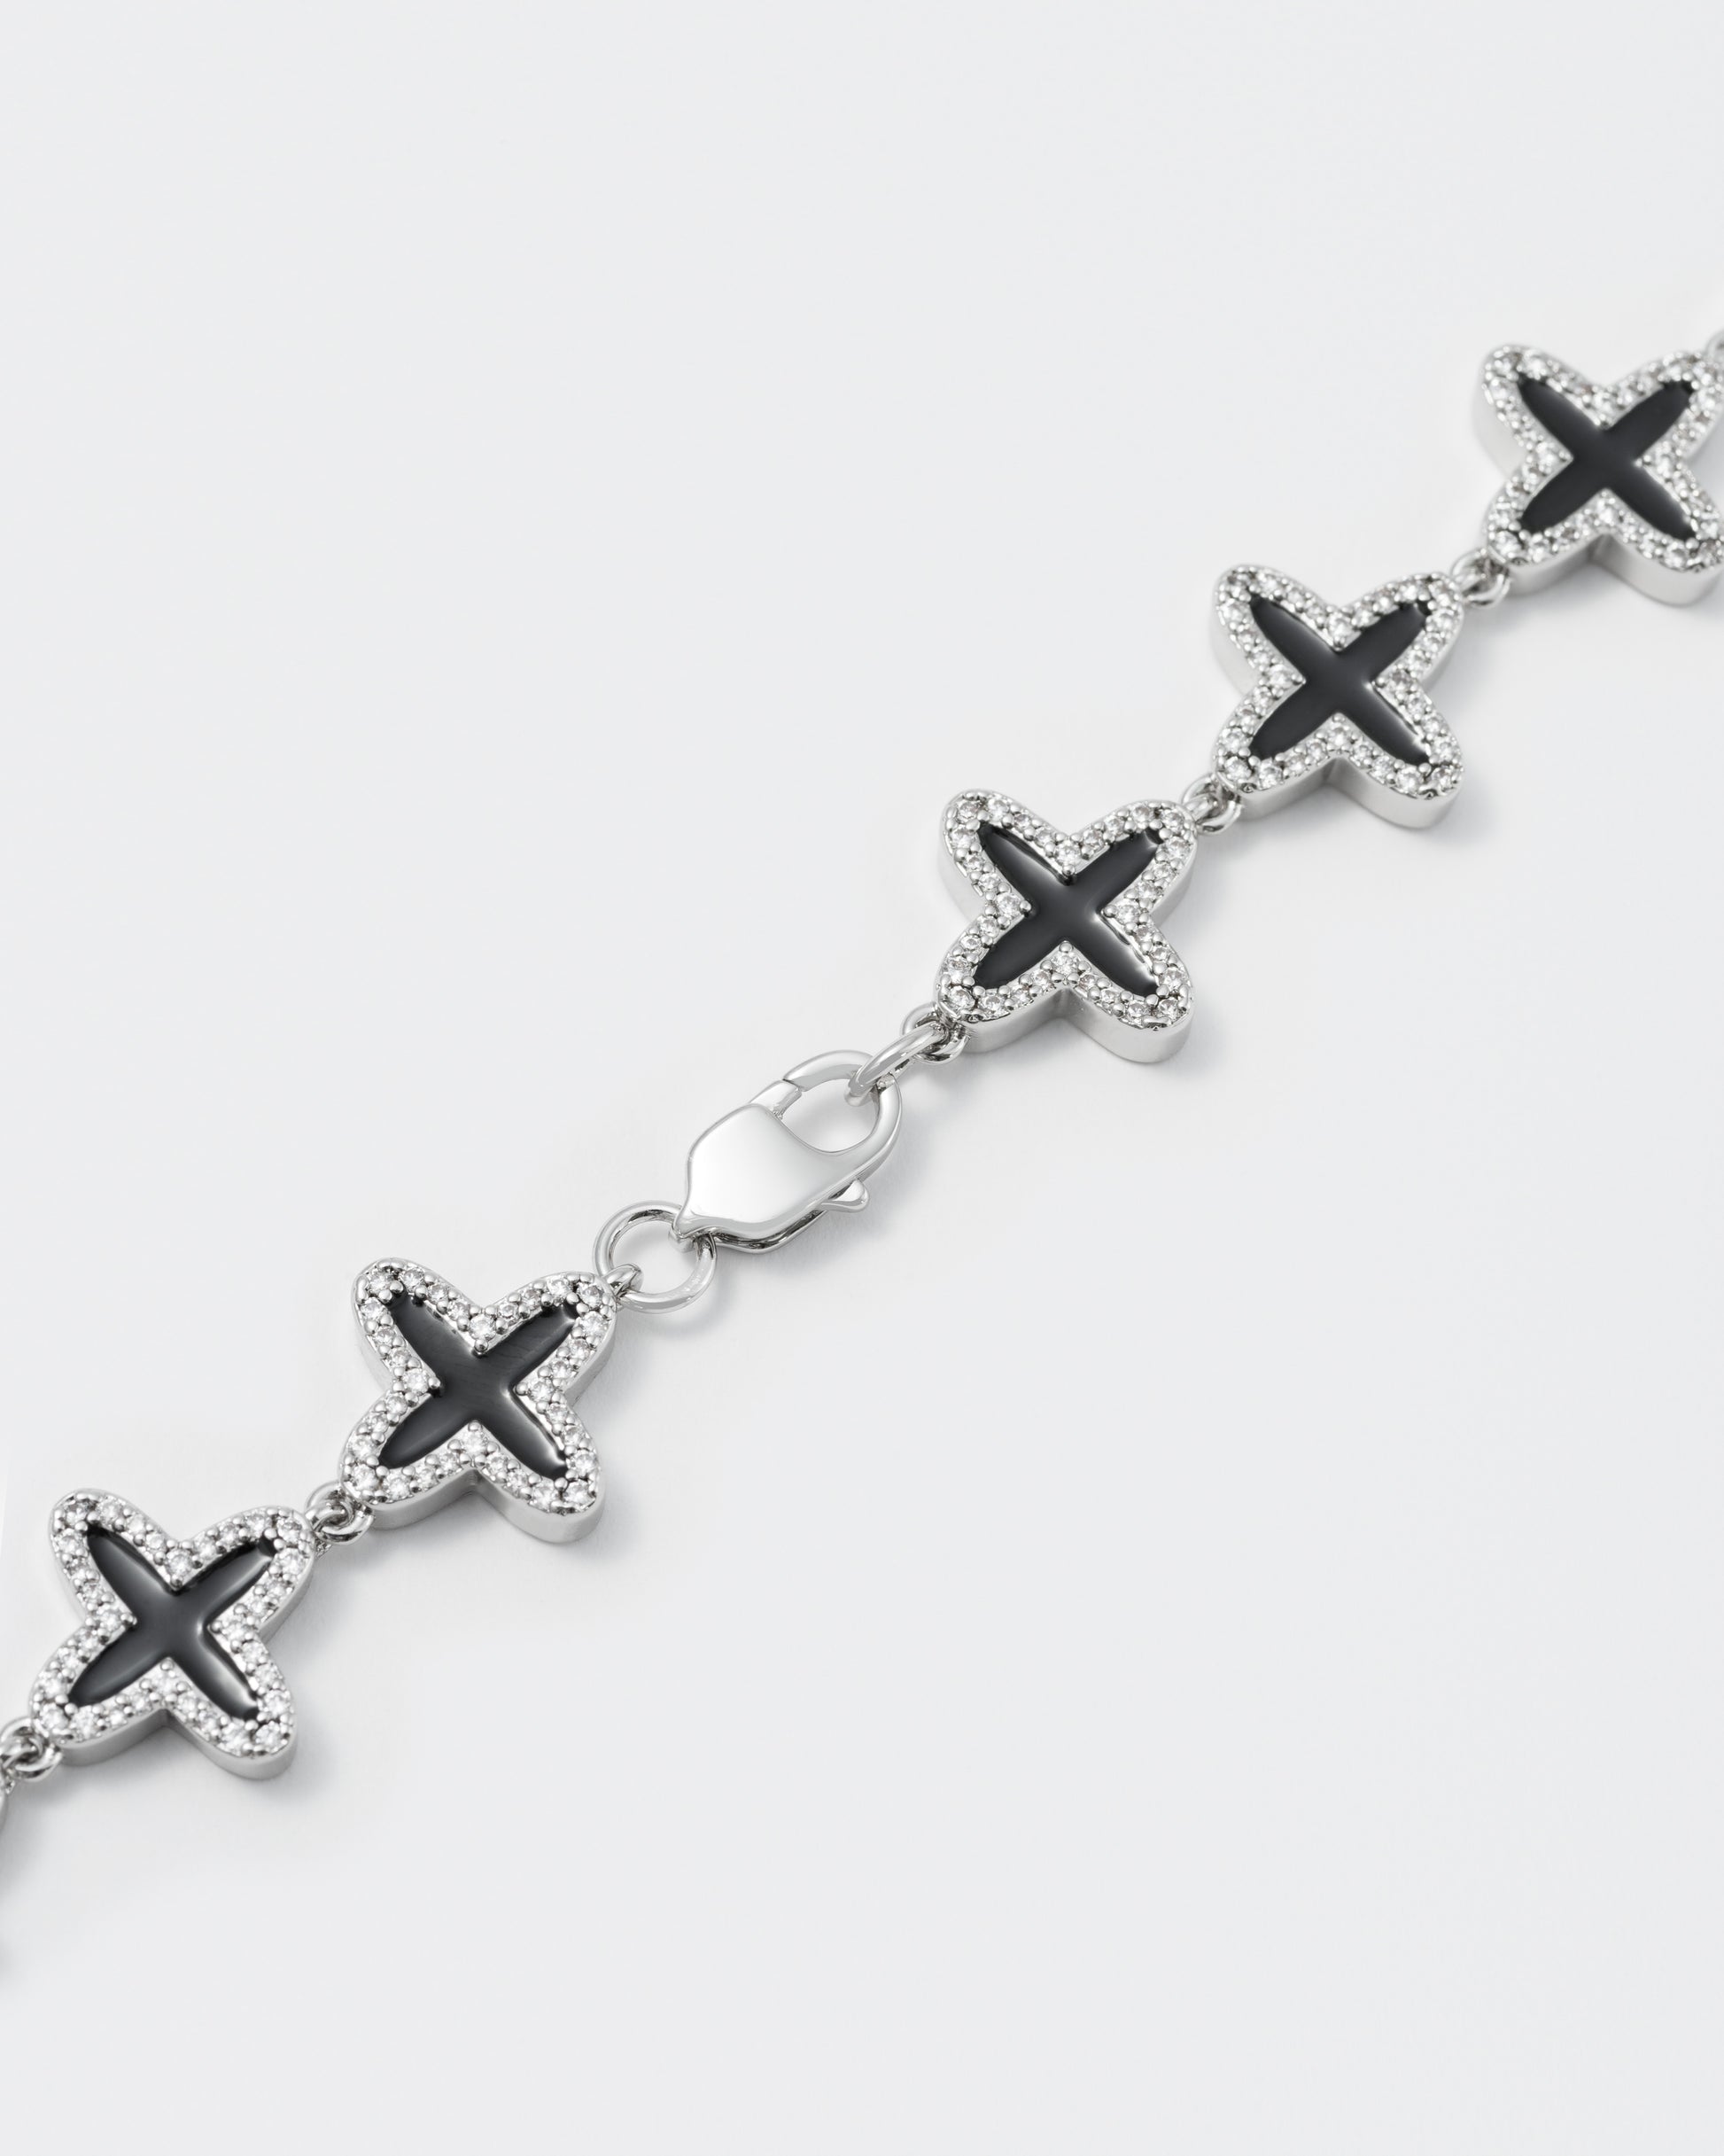 detail of clover tennis chain bracelet with 18kt white gold coating and hand-set stones in diamond white. Finished with hand painted black enamel and lobster clasp with logo